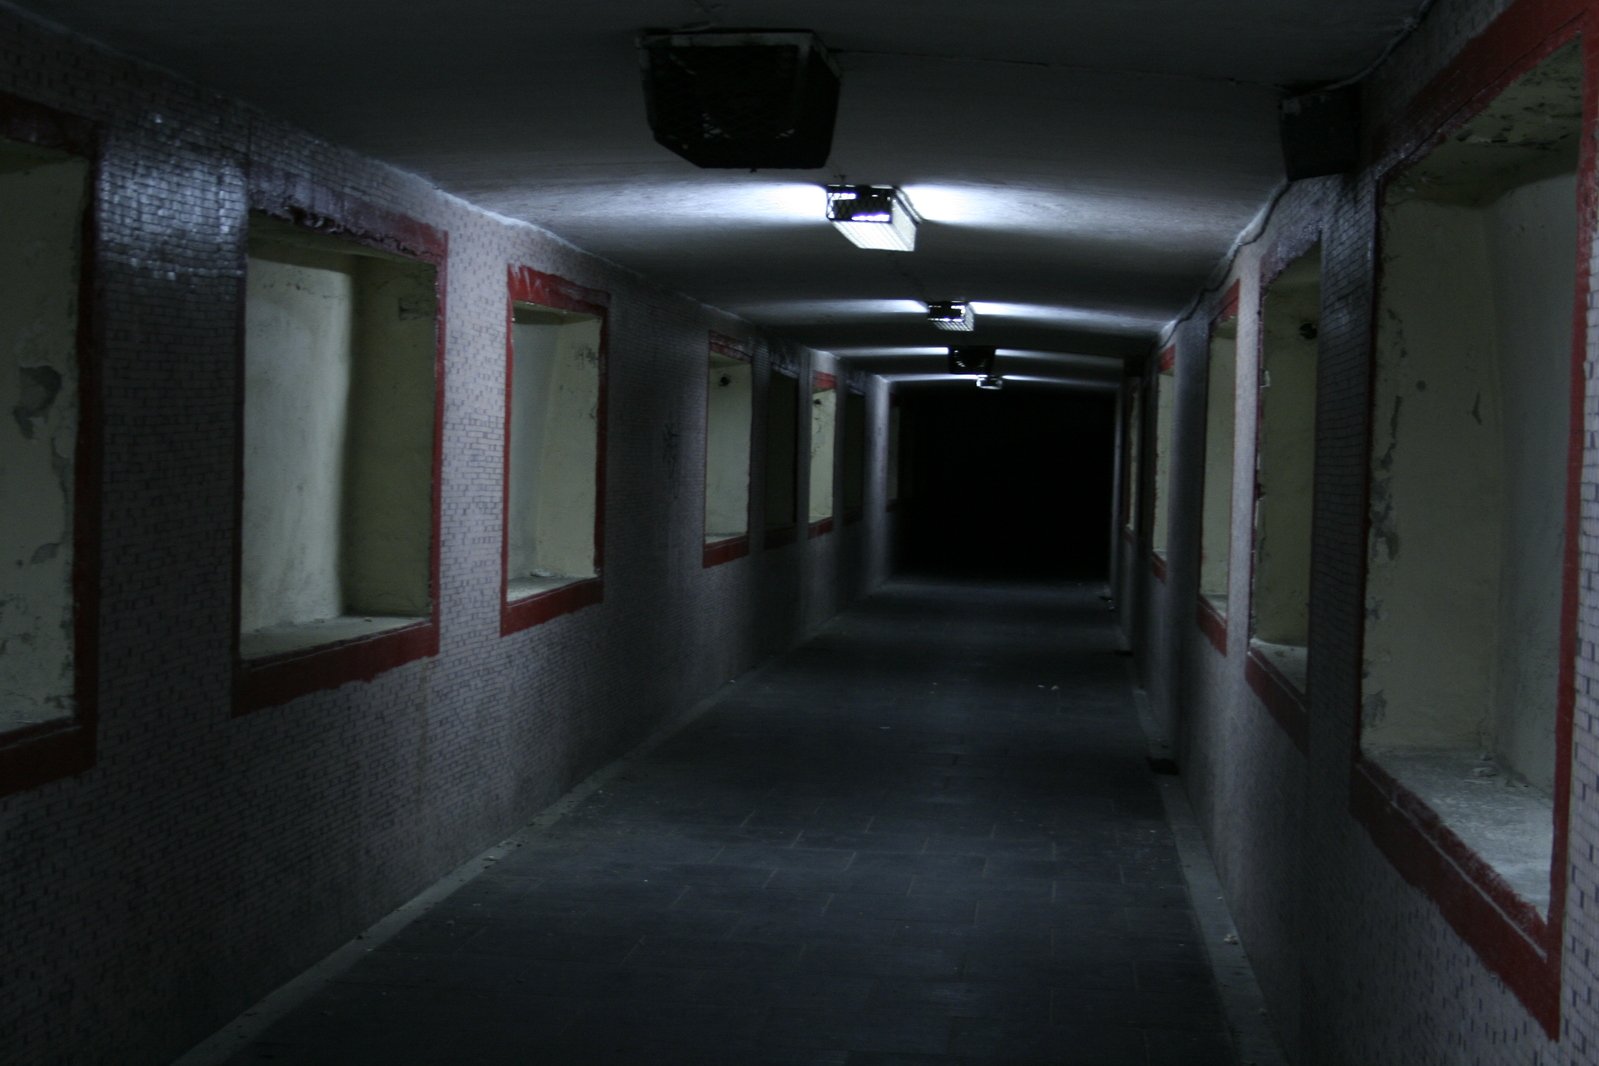 a very dark hallway with several windows and a red stripe around the edge